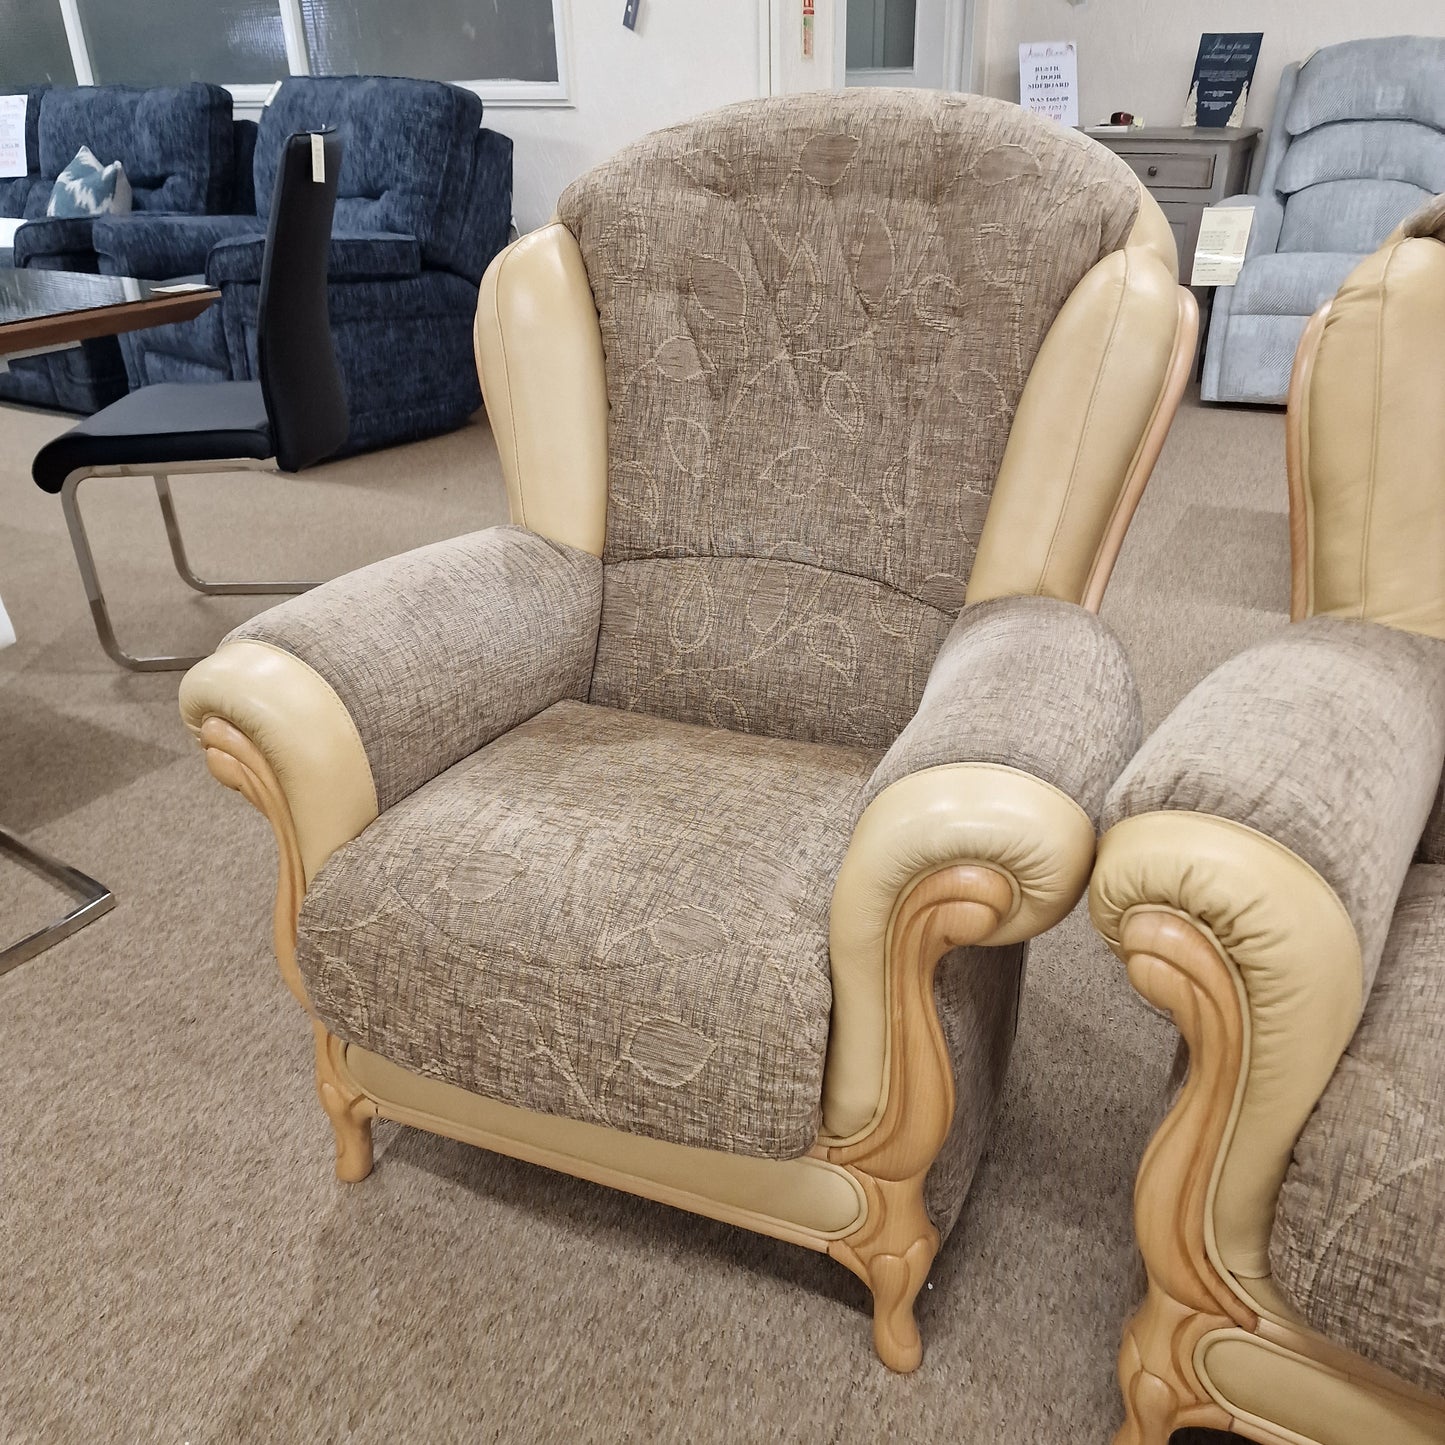 Queen Anne 3 Seater & Chair Set | Clearance